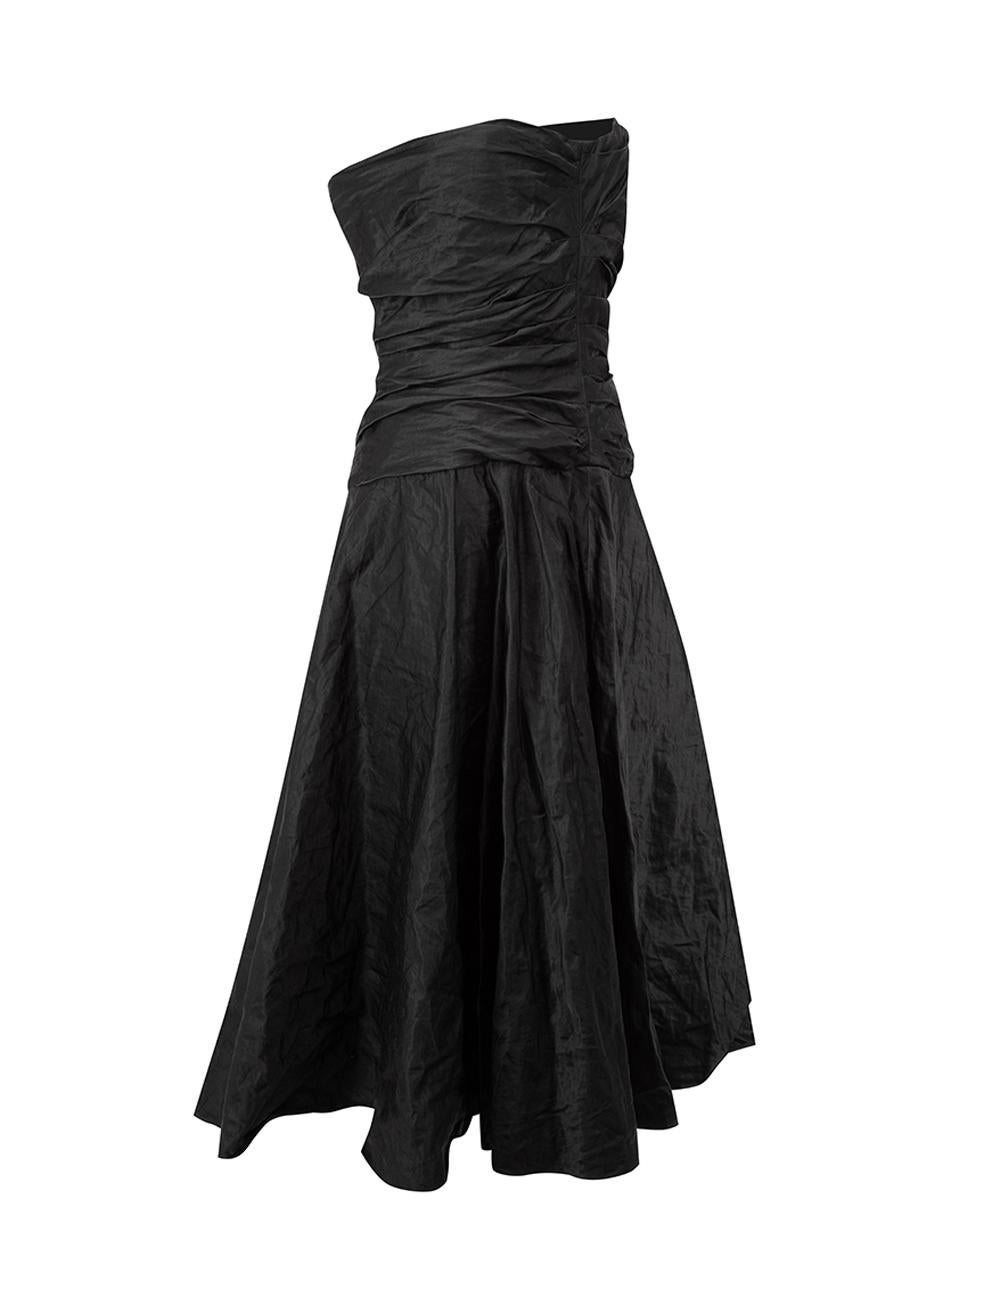 CONDITION is Very good. Hardly any visible wear to dress is evident on this used Ralph Lauren Black Label designer resale item.



Details


Black

Cotton

Strapless dress

Midi length

Ruched bodice detail

Side zip fastening





Made in